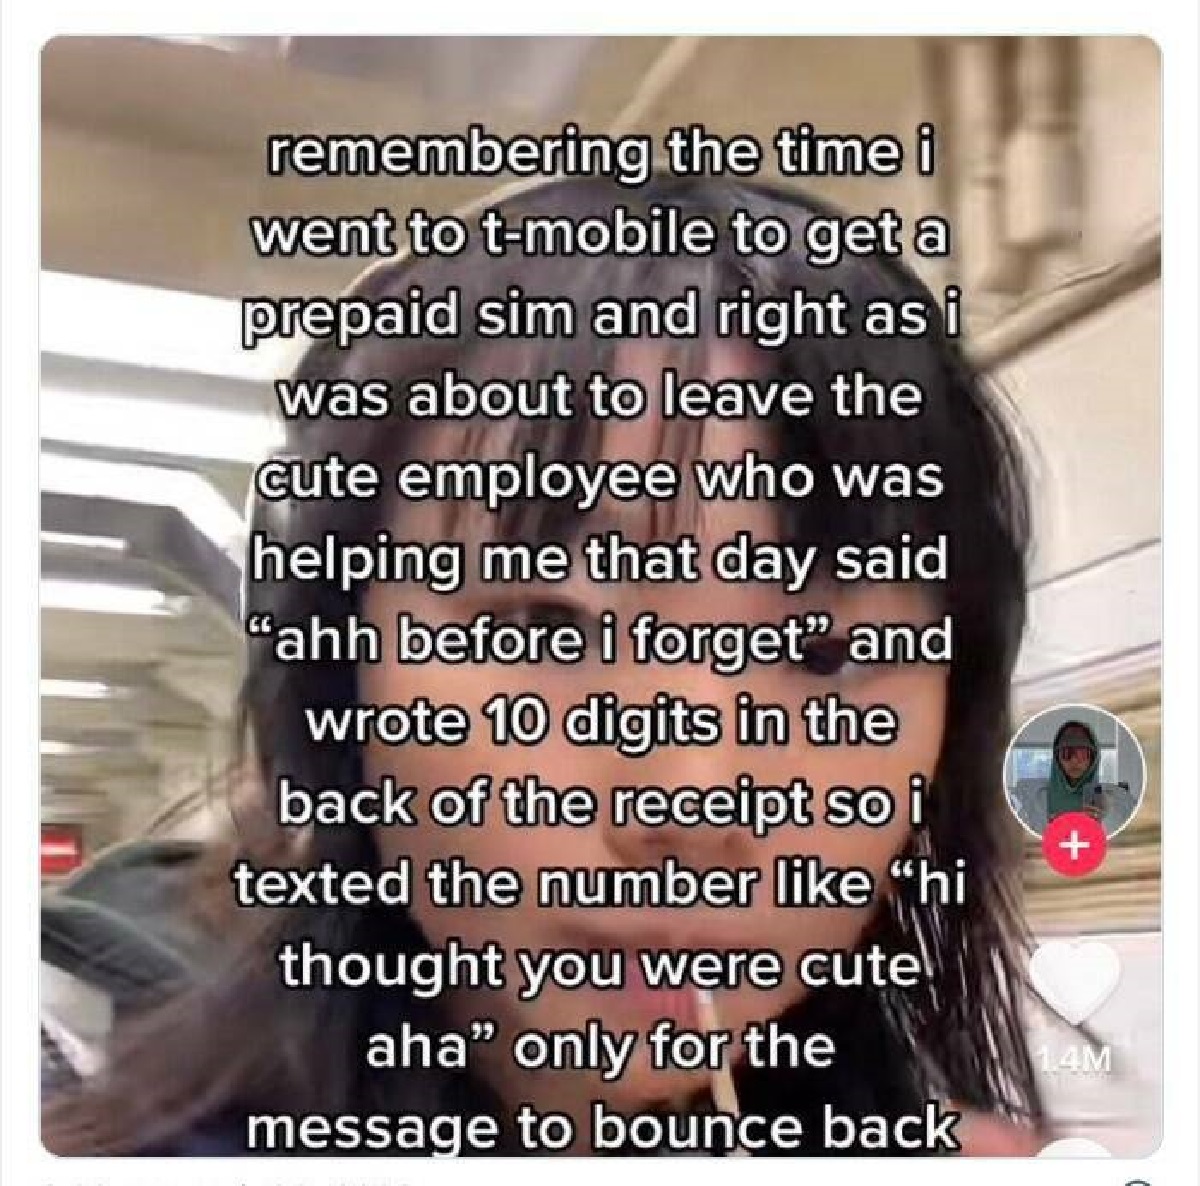 photo caption - remembering the time i went to tmobile to get a prepaid sim and right as i was about to leave the cute employee who was helping me that day said "ahh before i forget" and wrote 10 digits in the back of the receipt so i texted the number "h